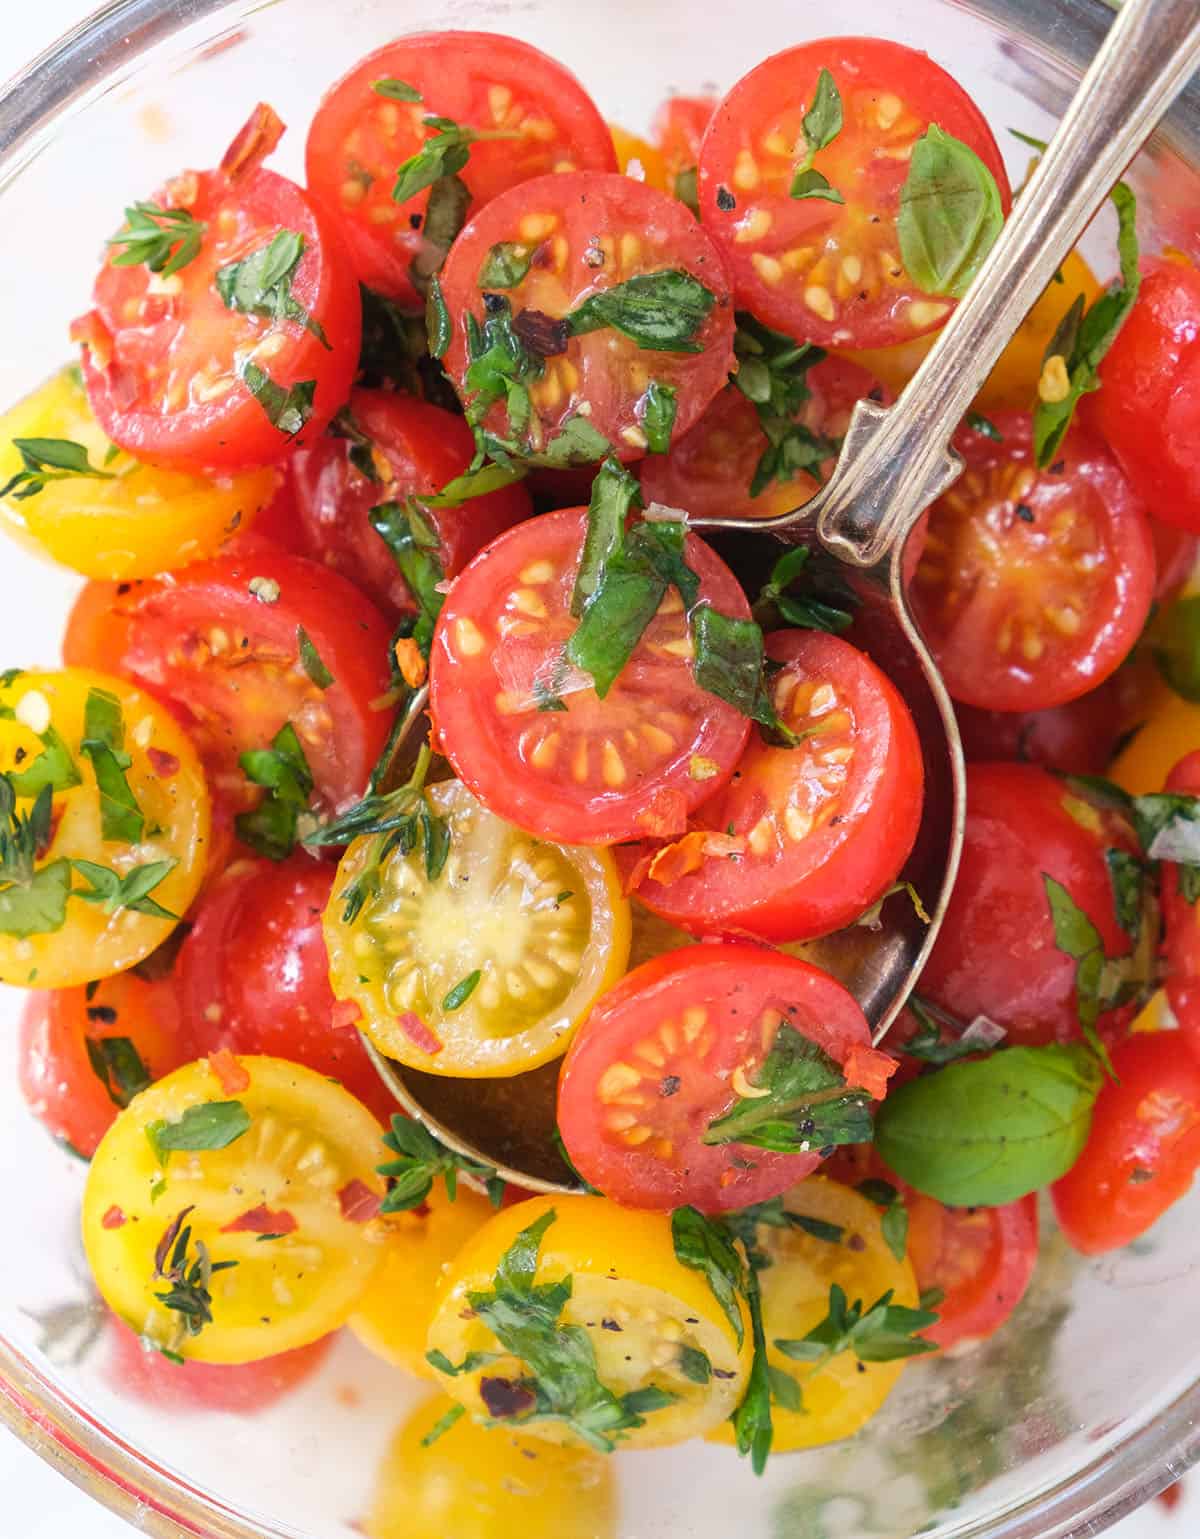 Top view of a glass bowl full of marinated cherry tomatoes with fresh basil.